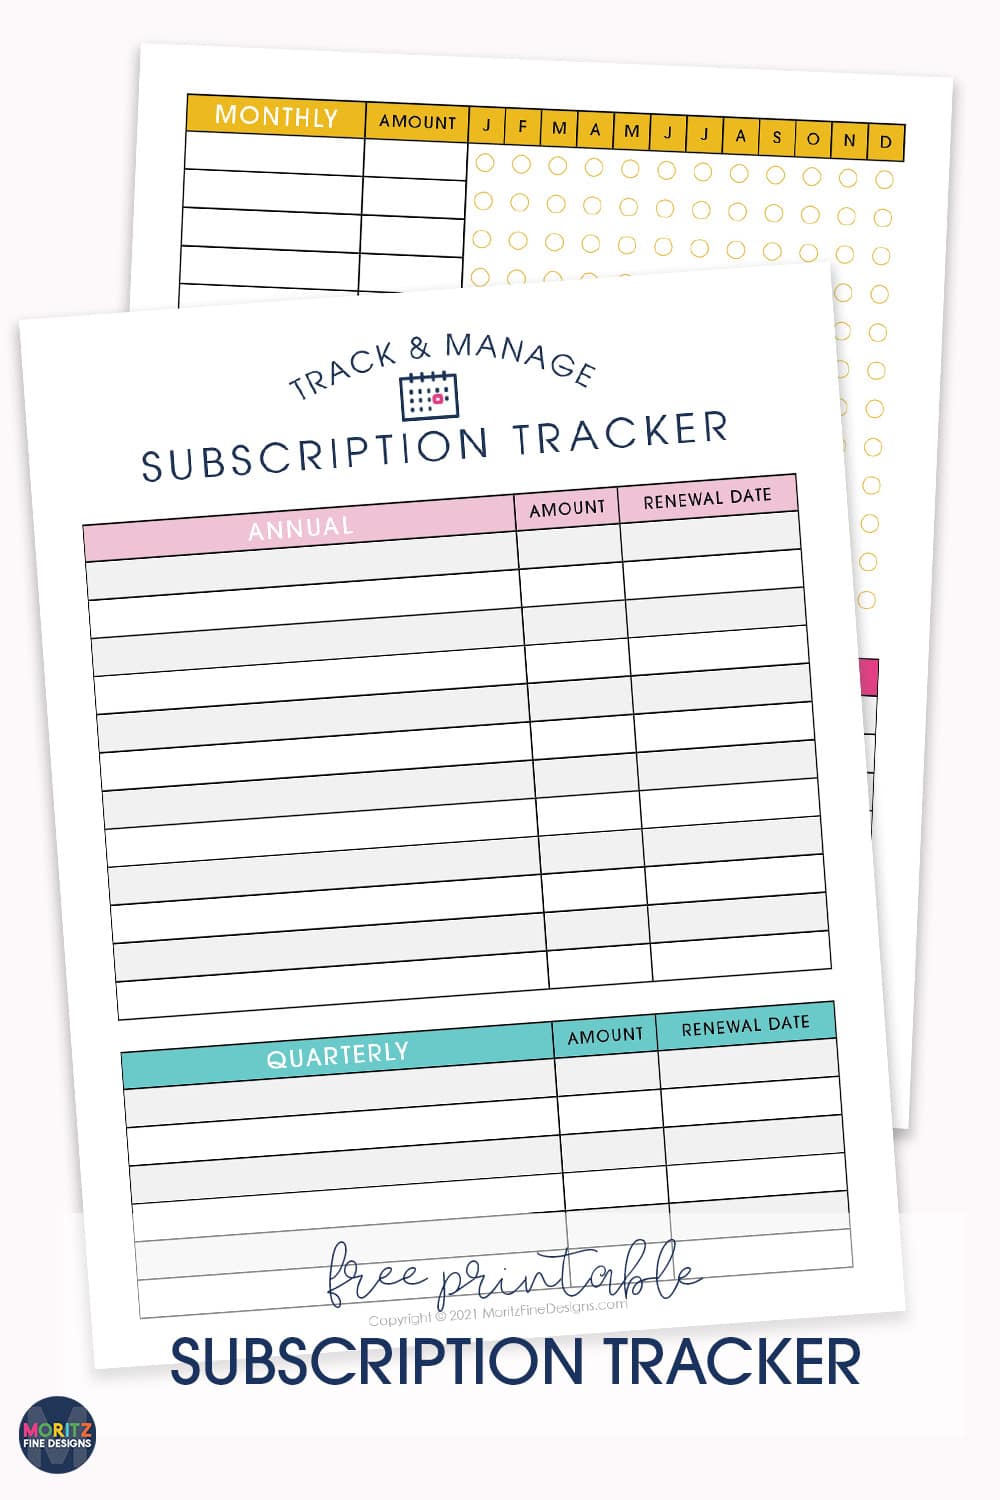 Keep track of all your subscriptions and know when they are set to auto-renew using the free printable Subscription Tracker.